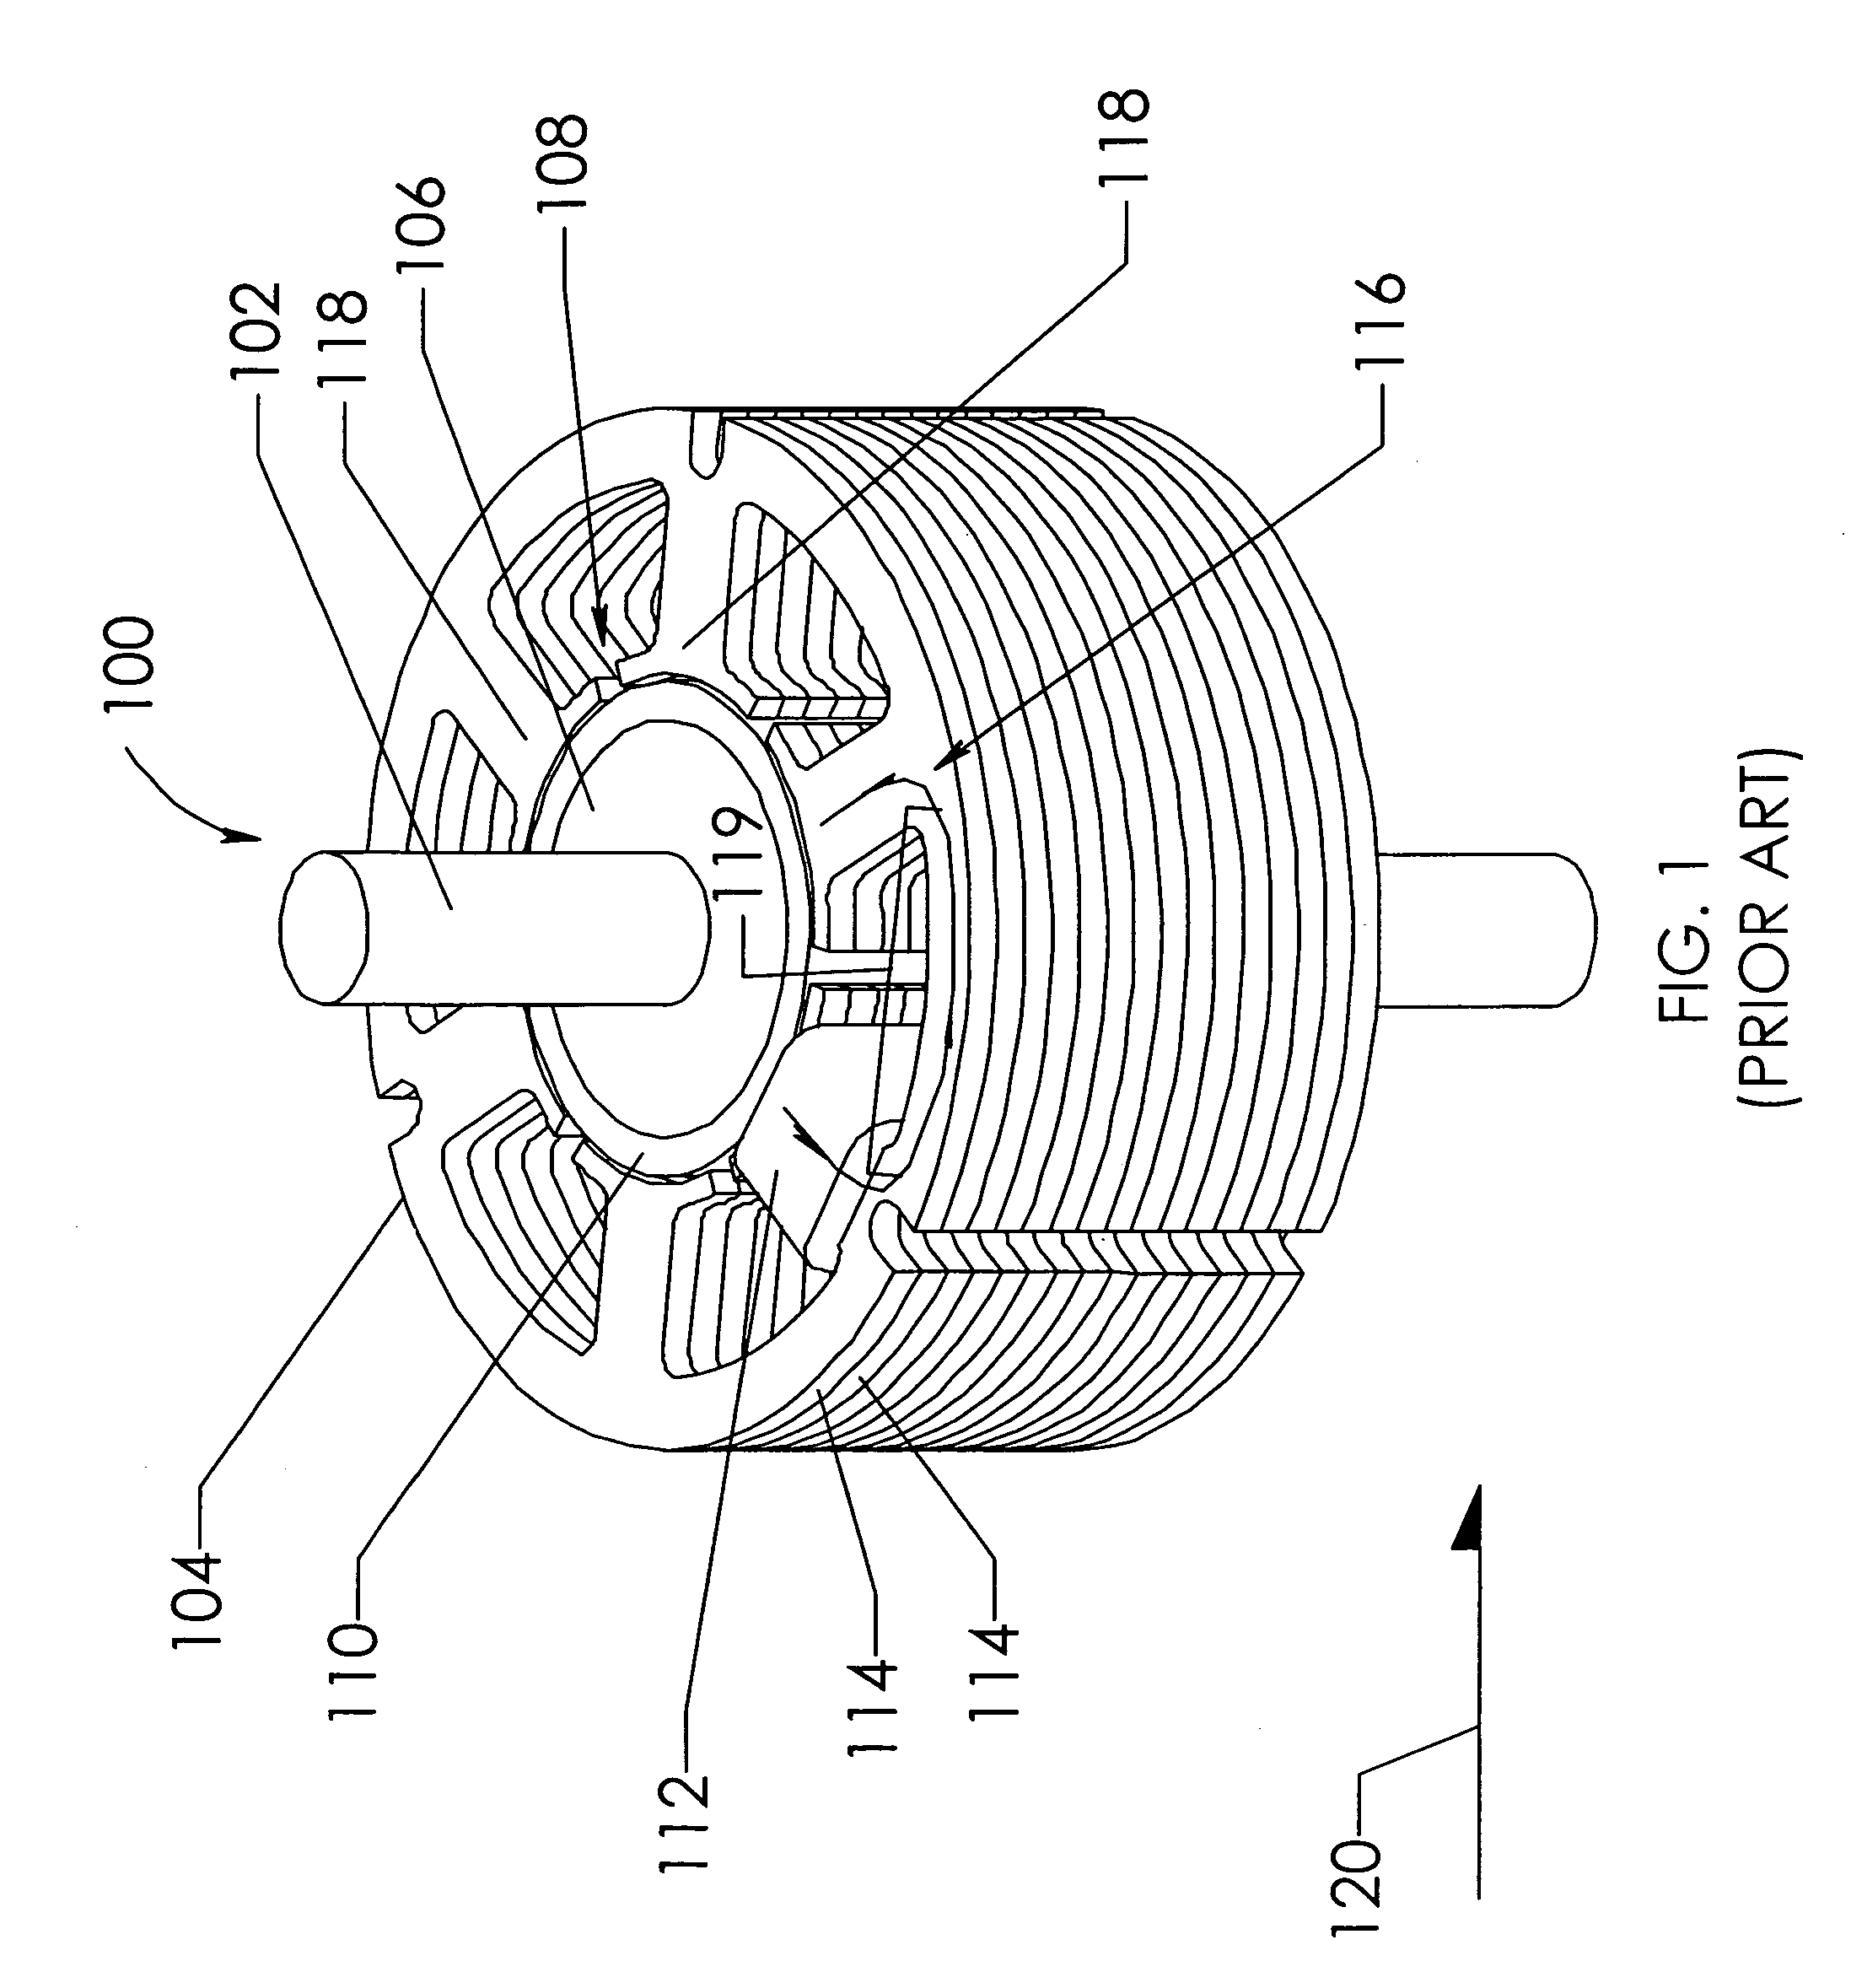 Rotor-stator structure for electrodynamic machines